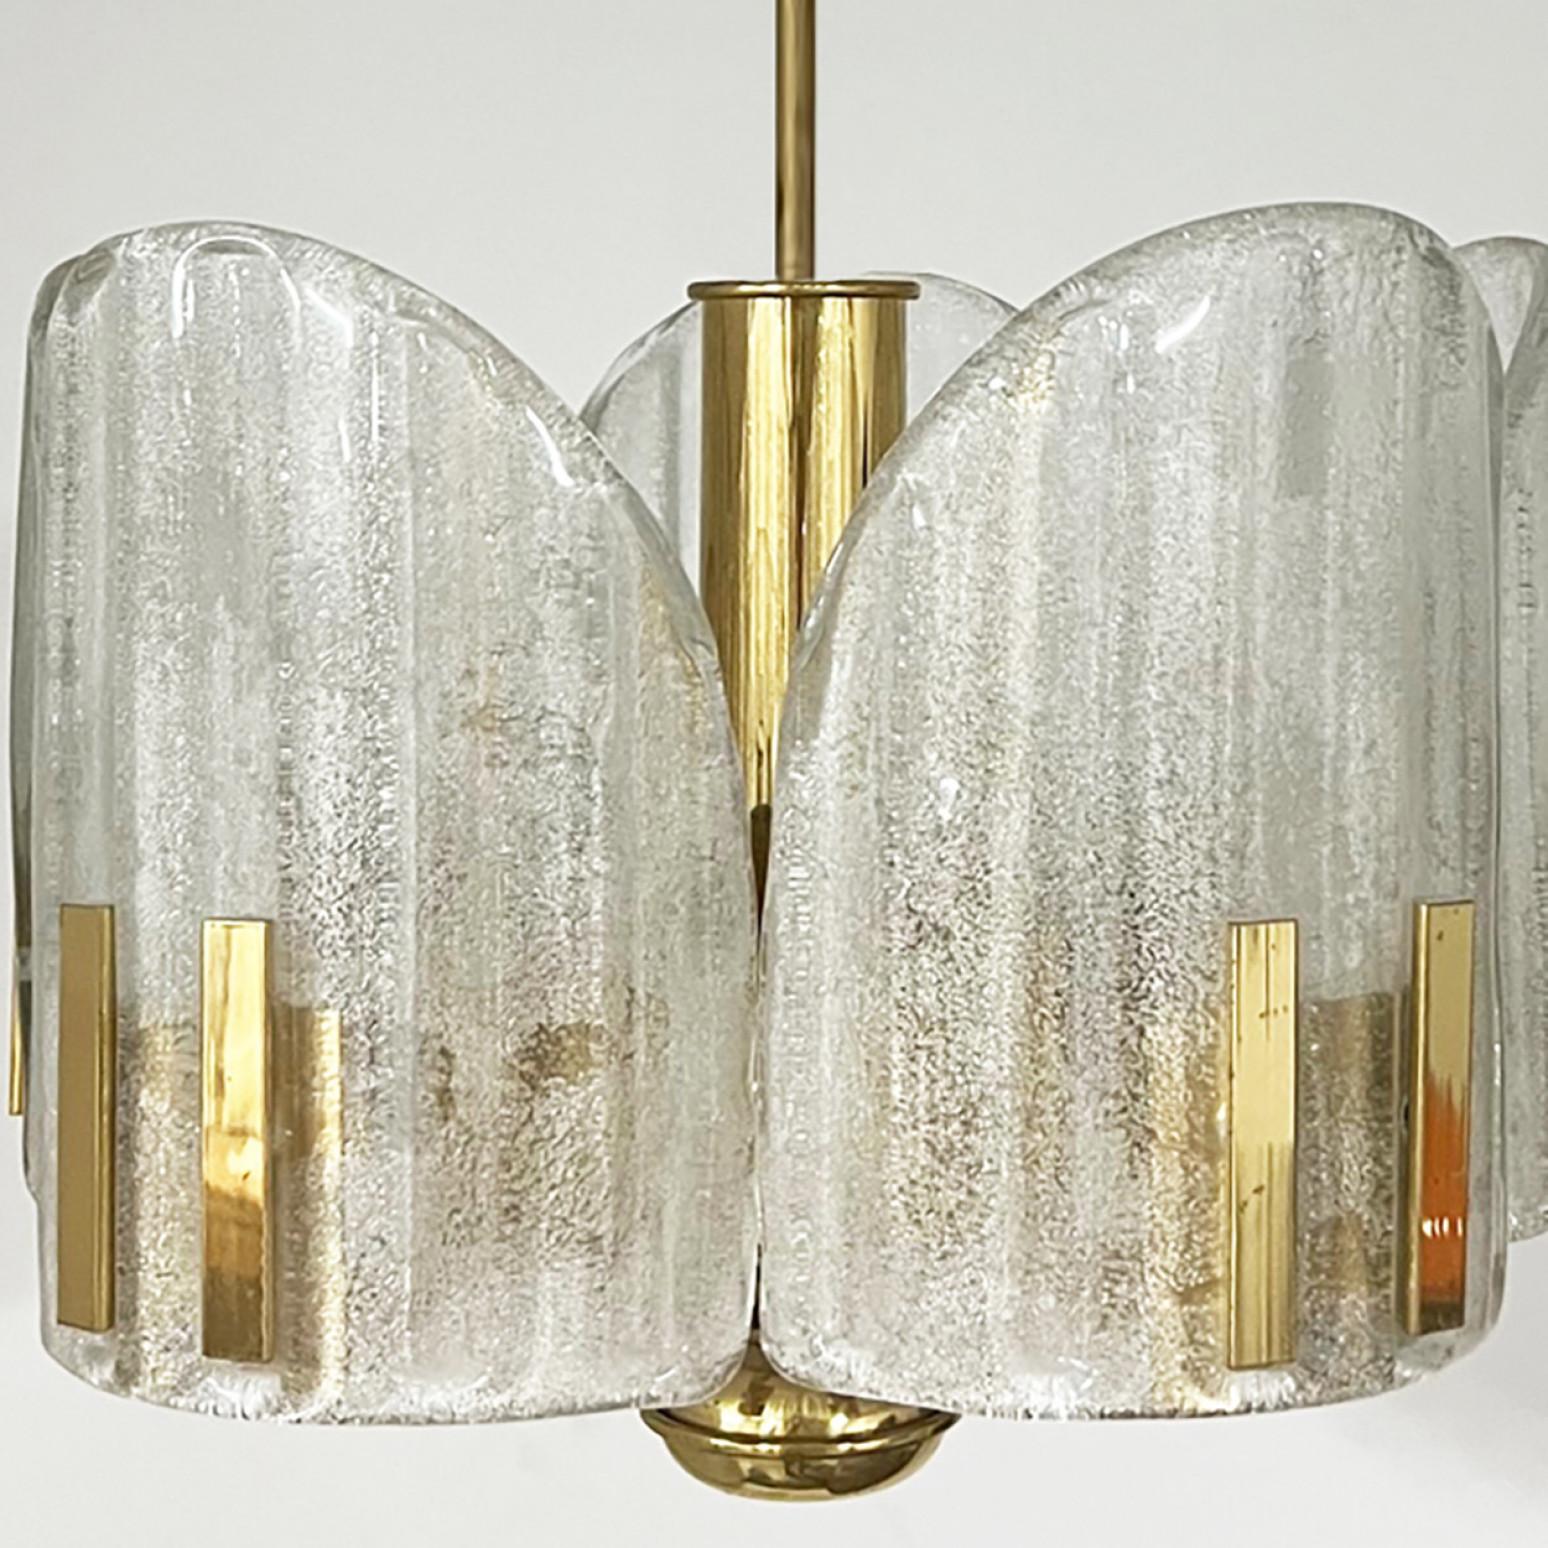 Charming chandelier in the style of Fagerlund, Sweden. From around 1960. Consists of five crystal handmade glass cylinders on polished brass arms.

The texture of the glass gives the illusion of ice crystals which creates a beautiful ambience.